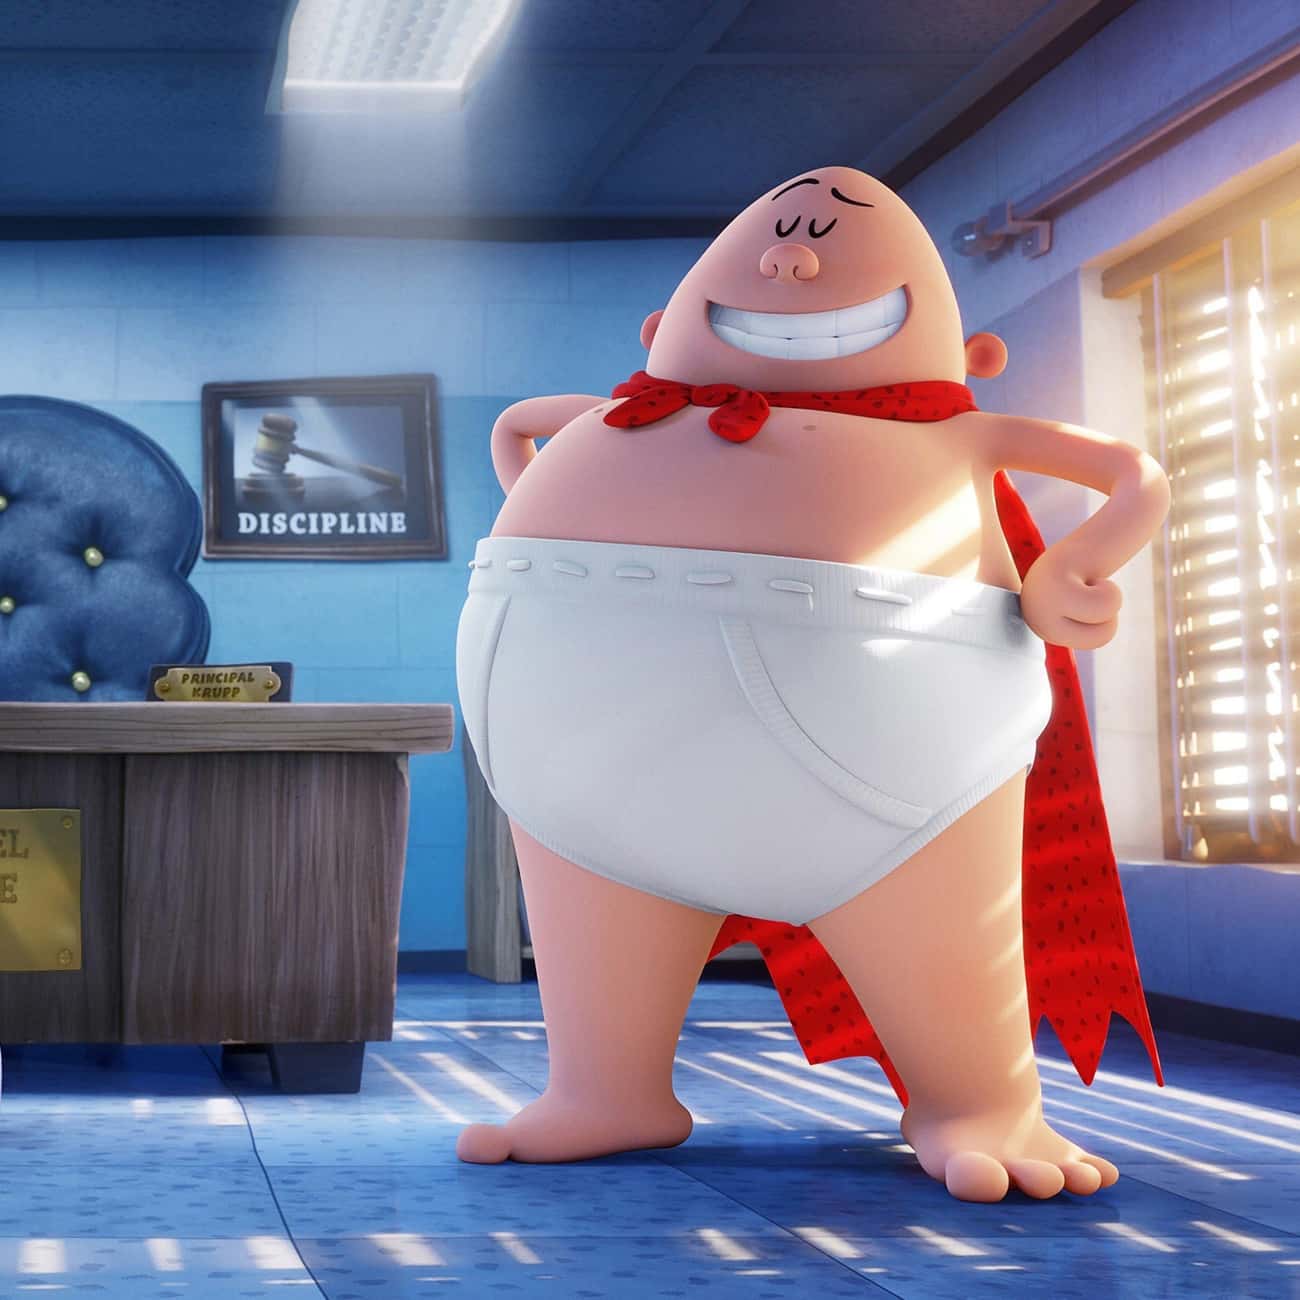 &#39;Captain Underpants: The First Epic Movie&#39; Explores Child Psychology In A Profound Way